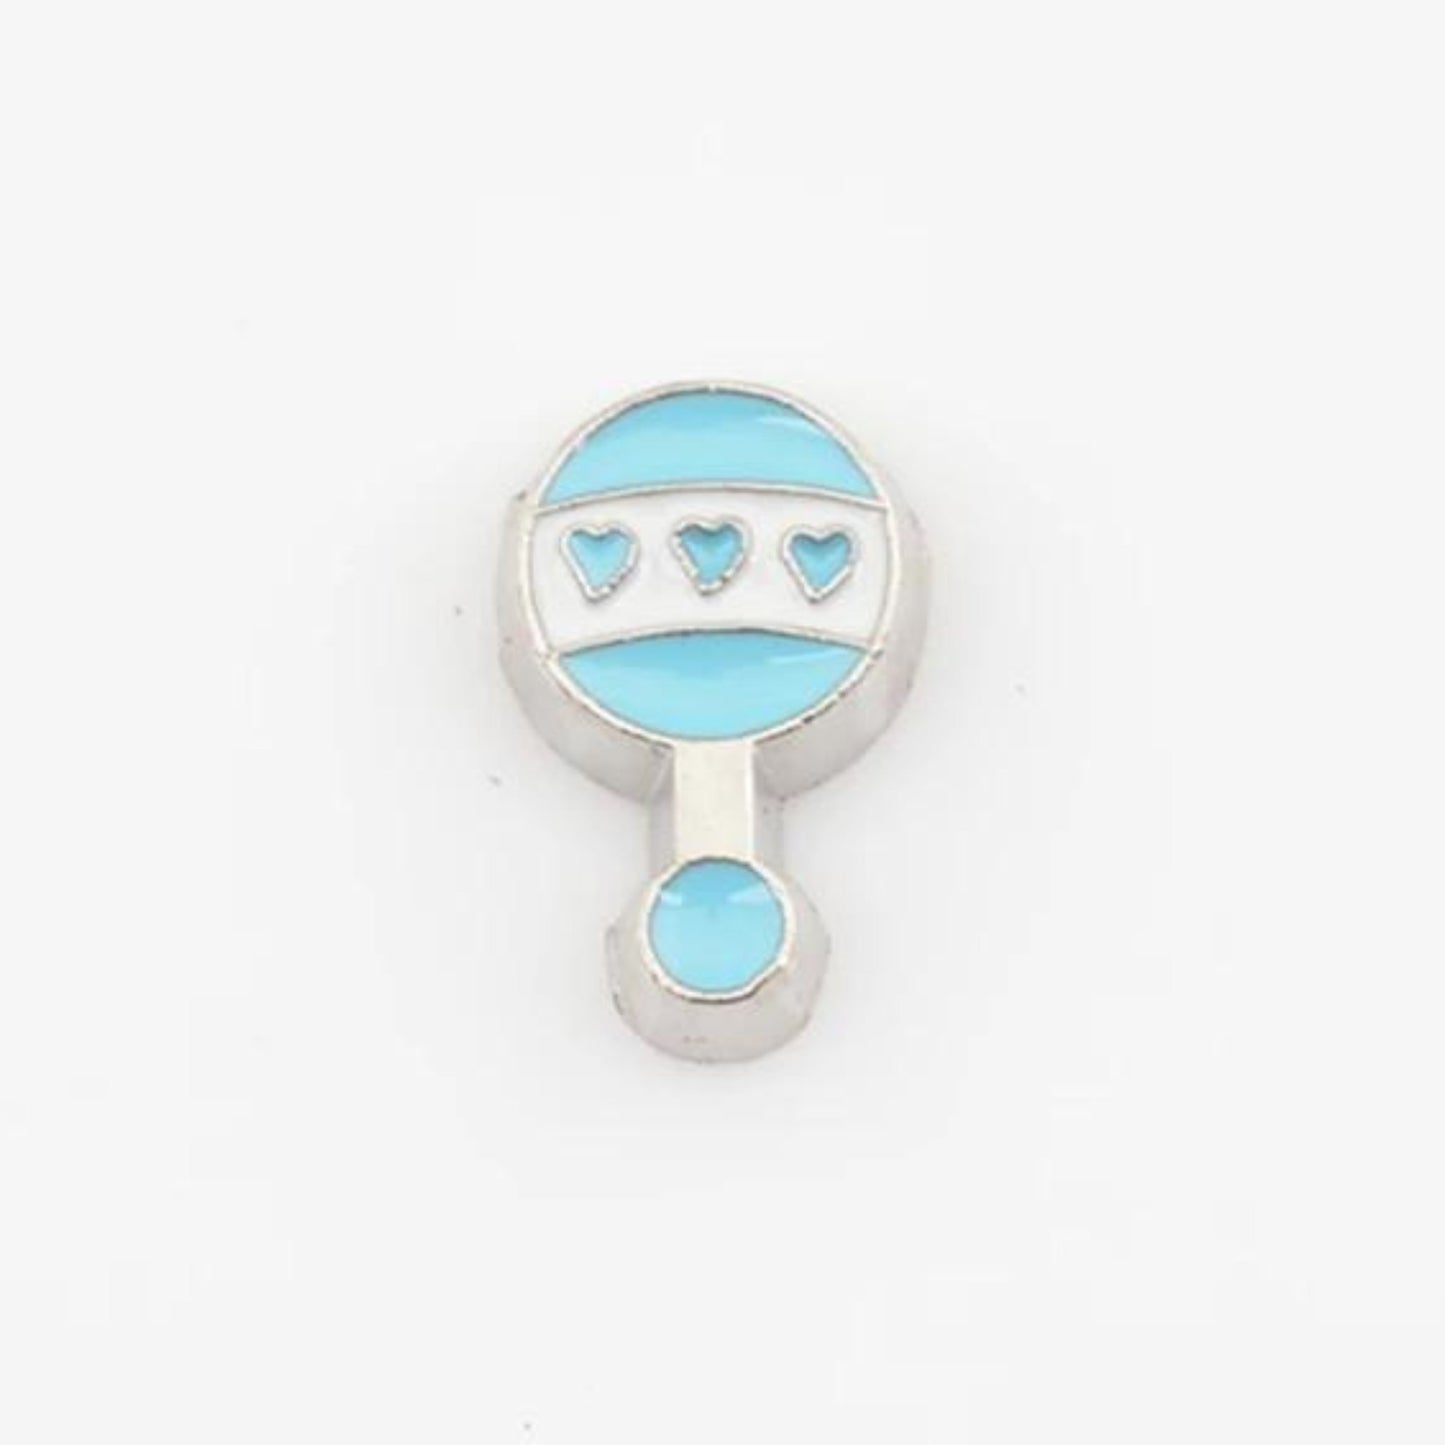 Memory Locket Charm - Baby’s Rattle (Blue) - The Little Jewellery Company